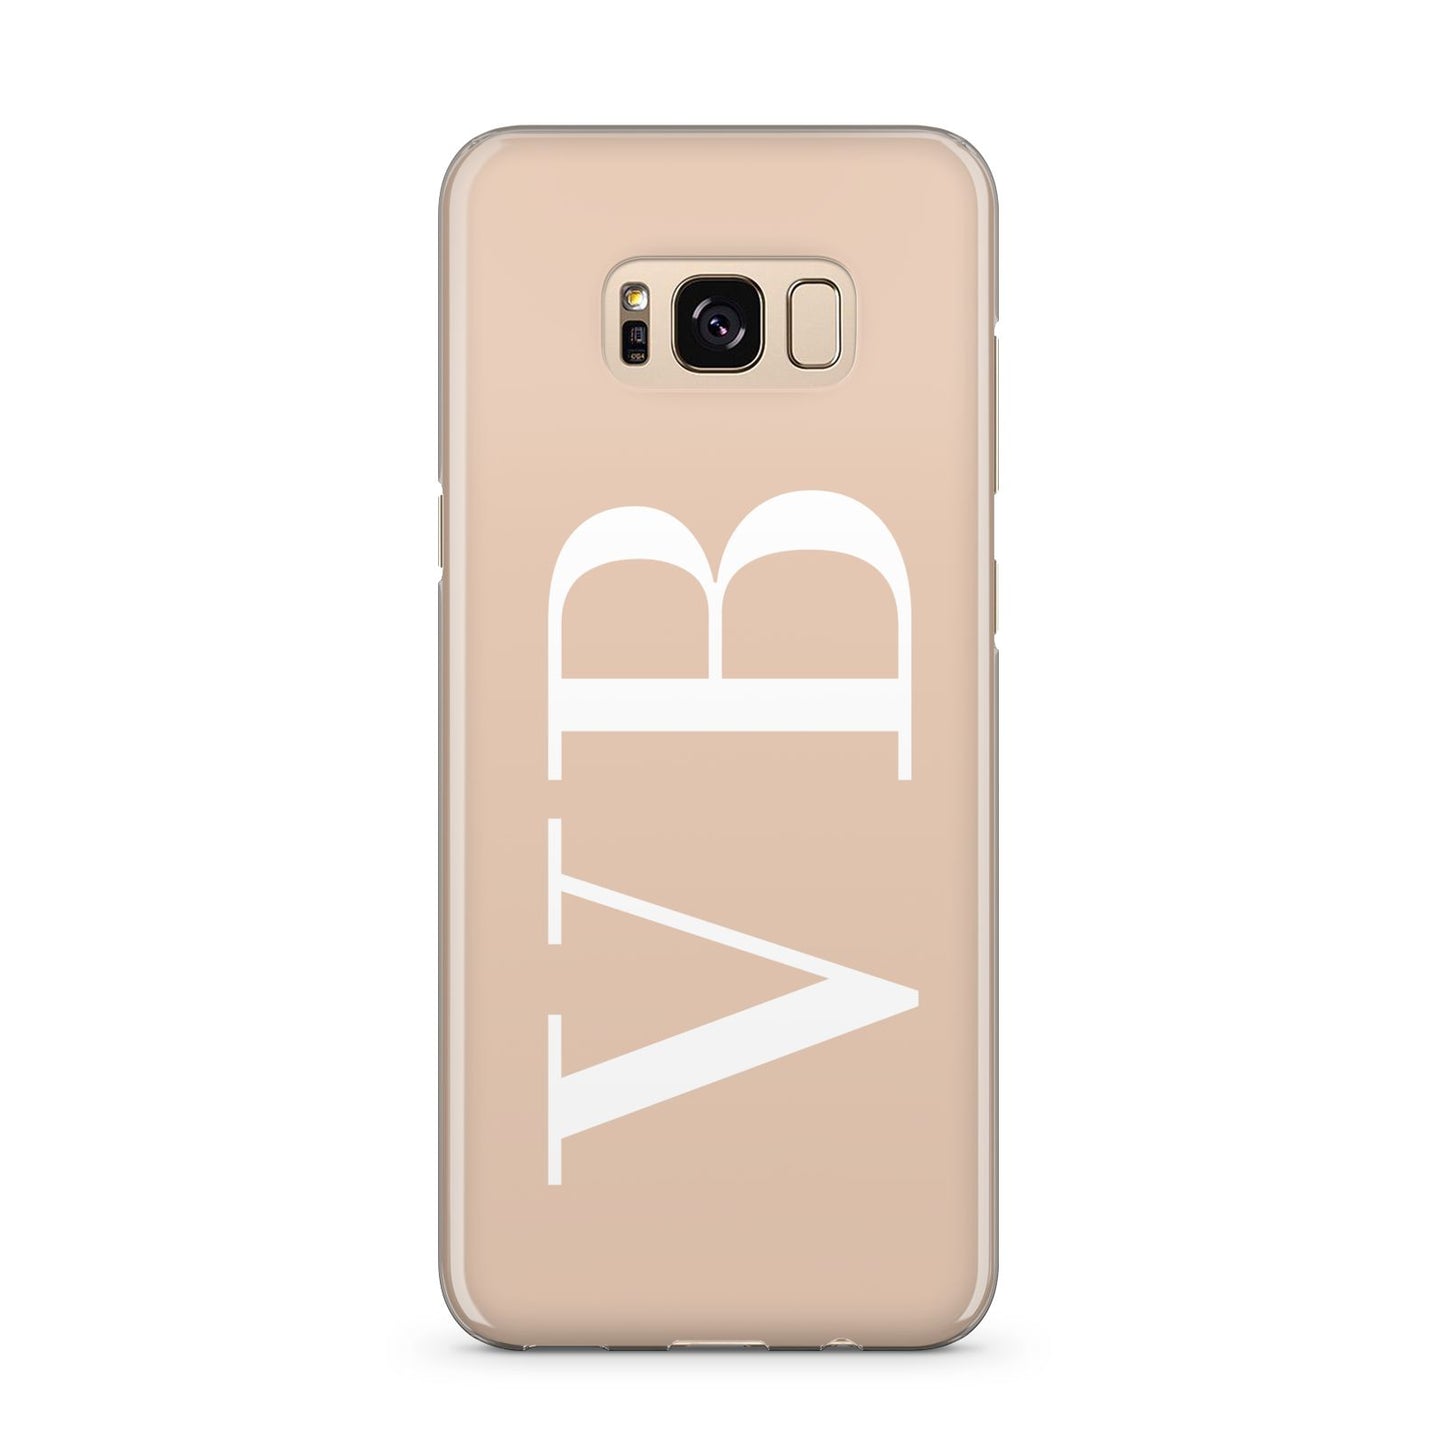 Nude And White Personalised Samsung Galaxy S8 Plus Case